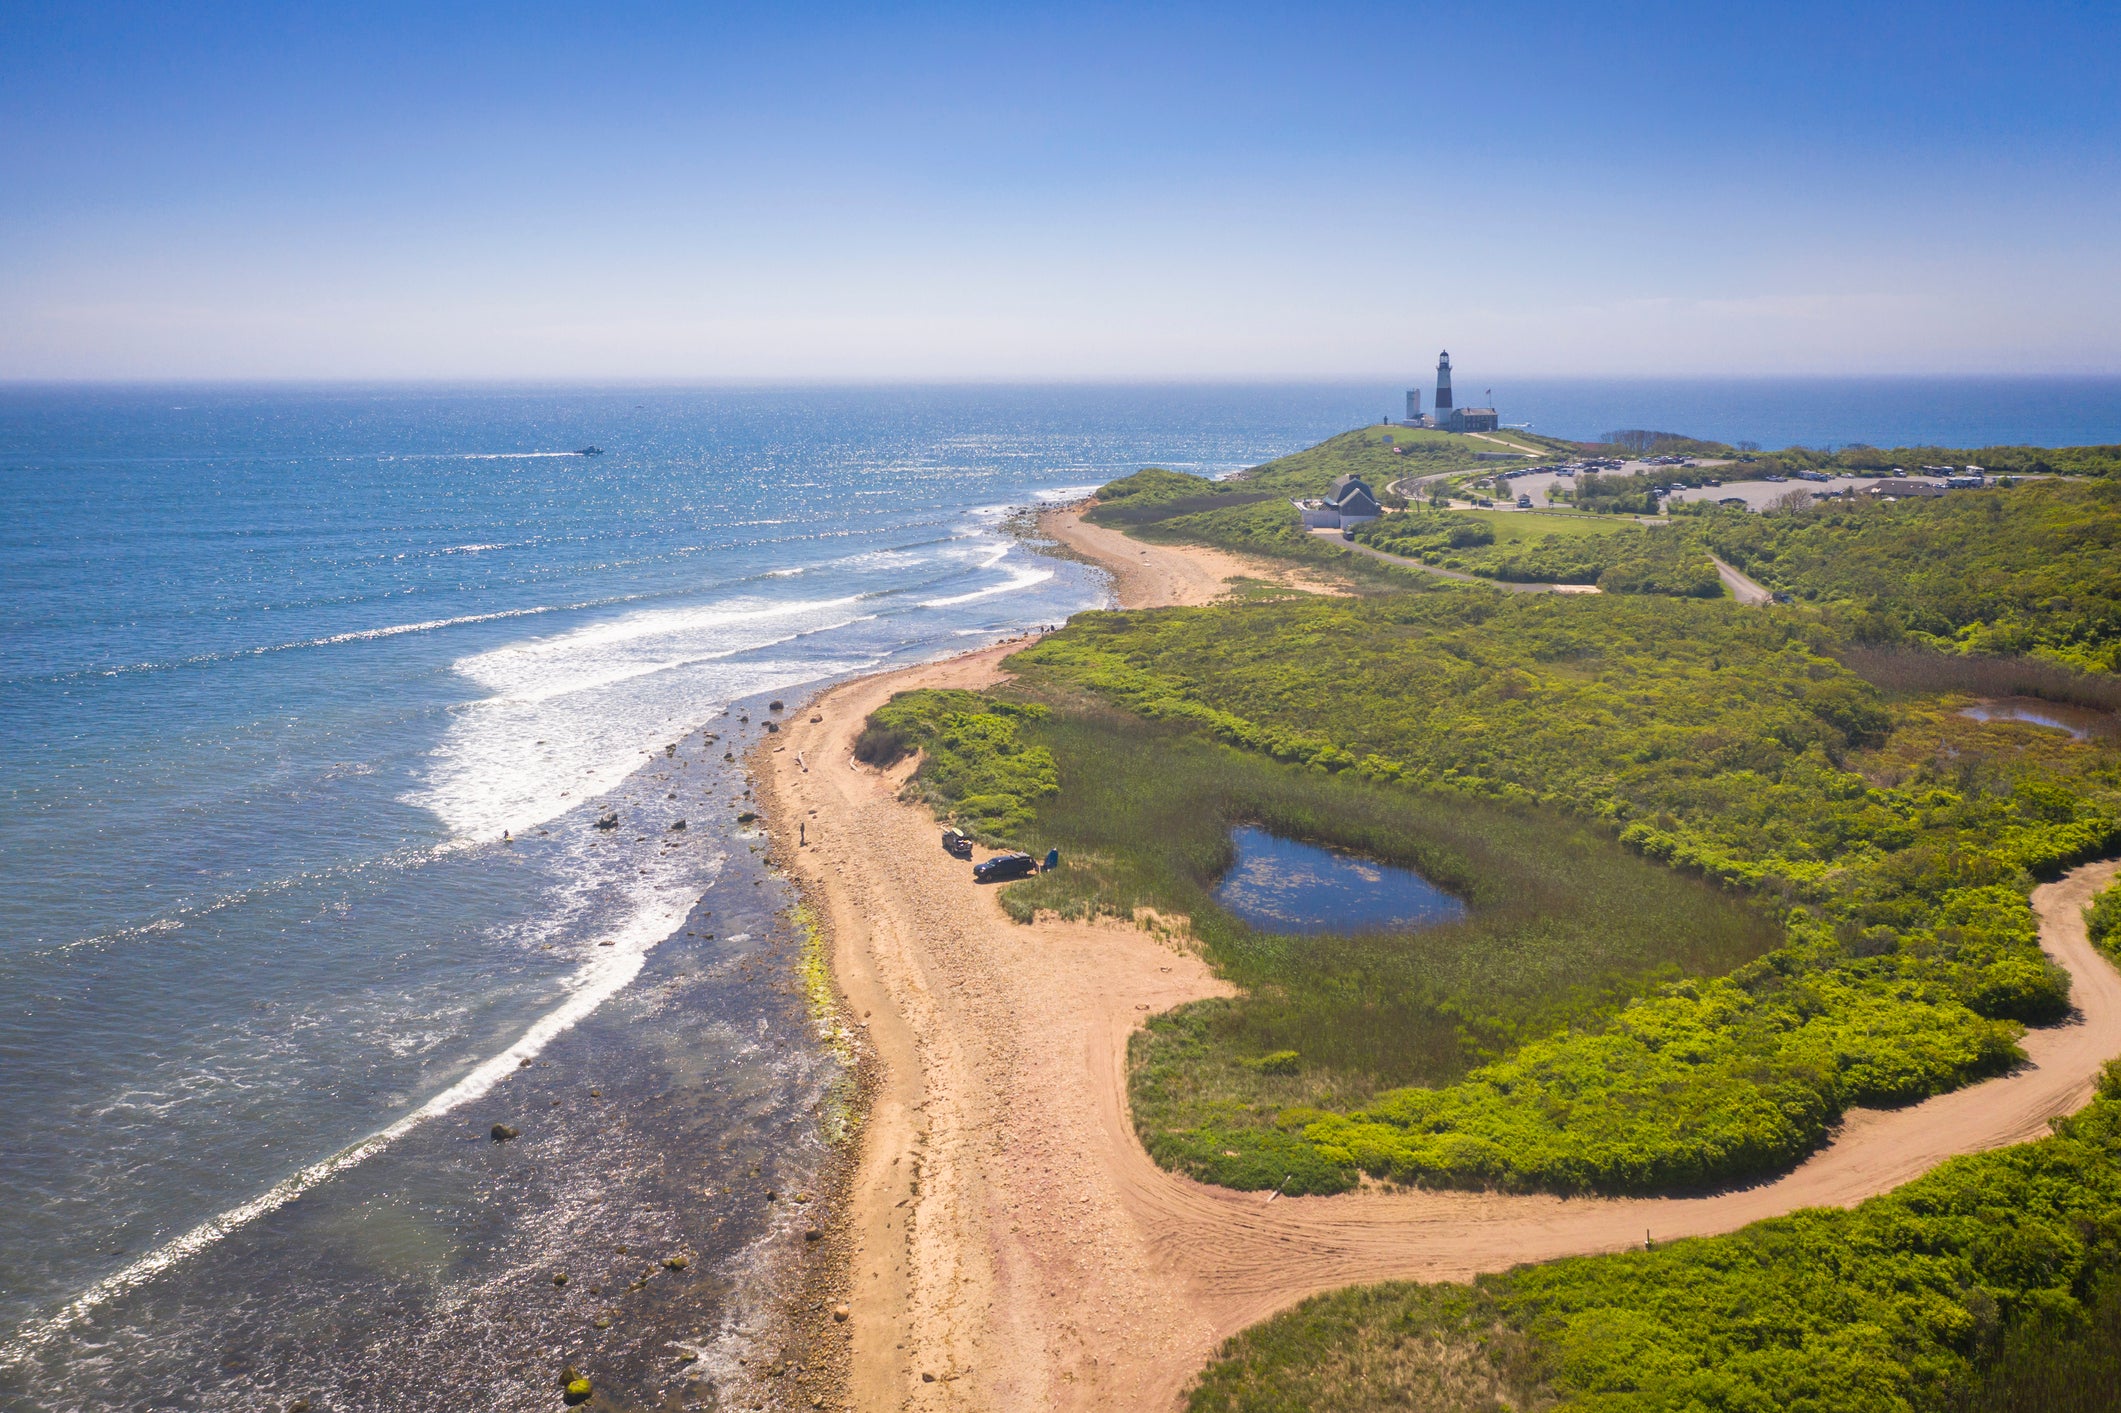 Montauk’s windswept beaches doubled as a private island